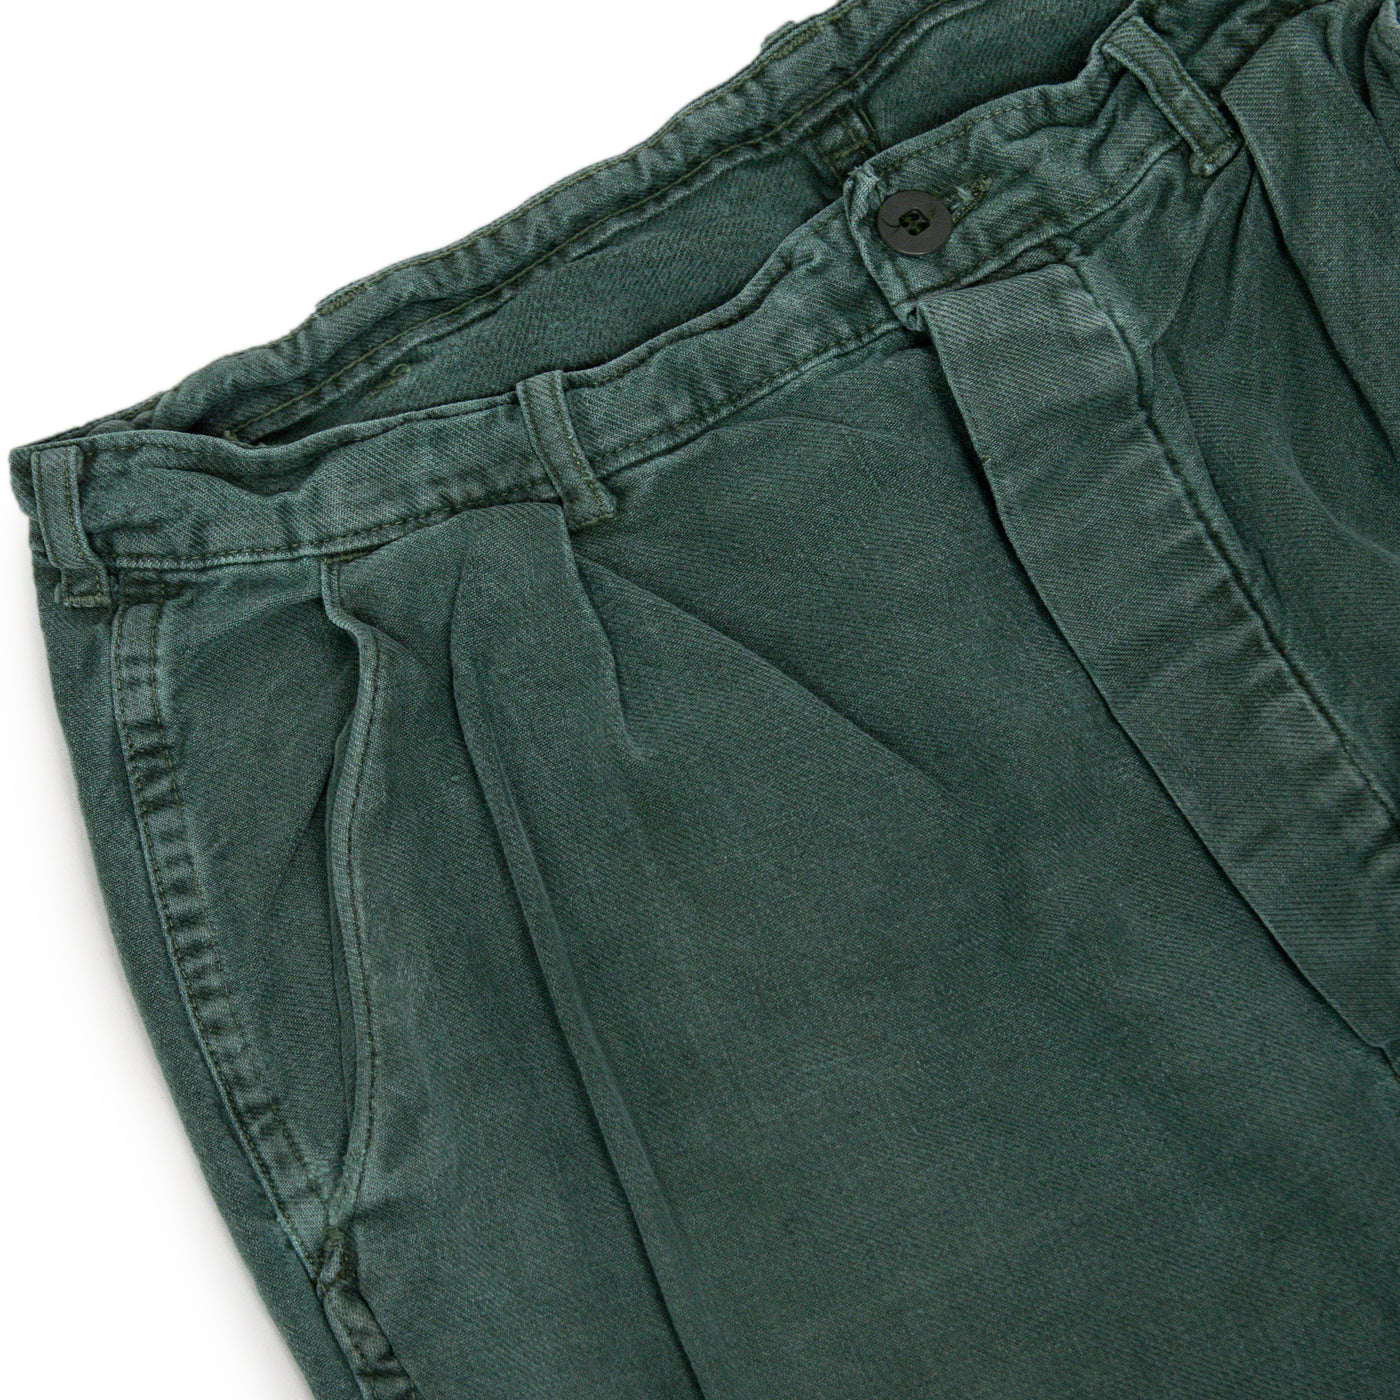 Vintage 70s Distressed Swedish Military Field Trousers Worker Style Green 30 W front detail